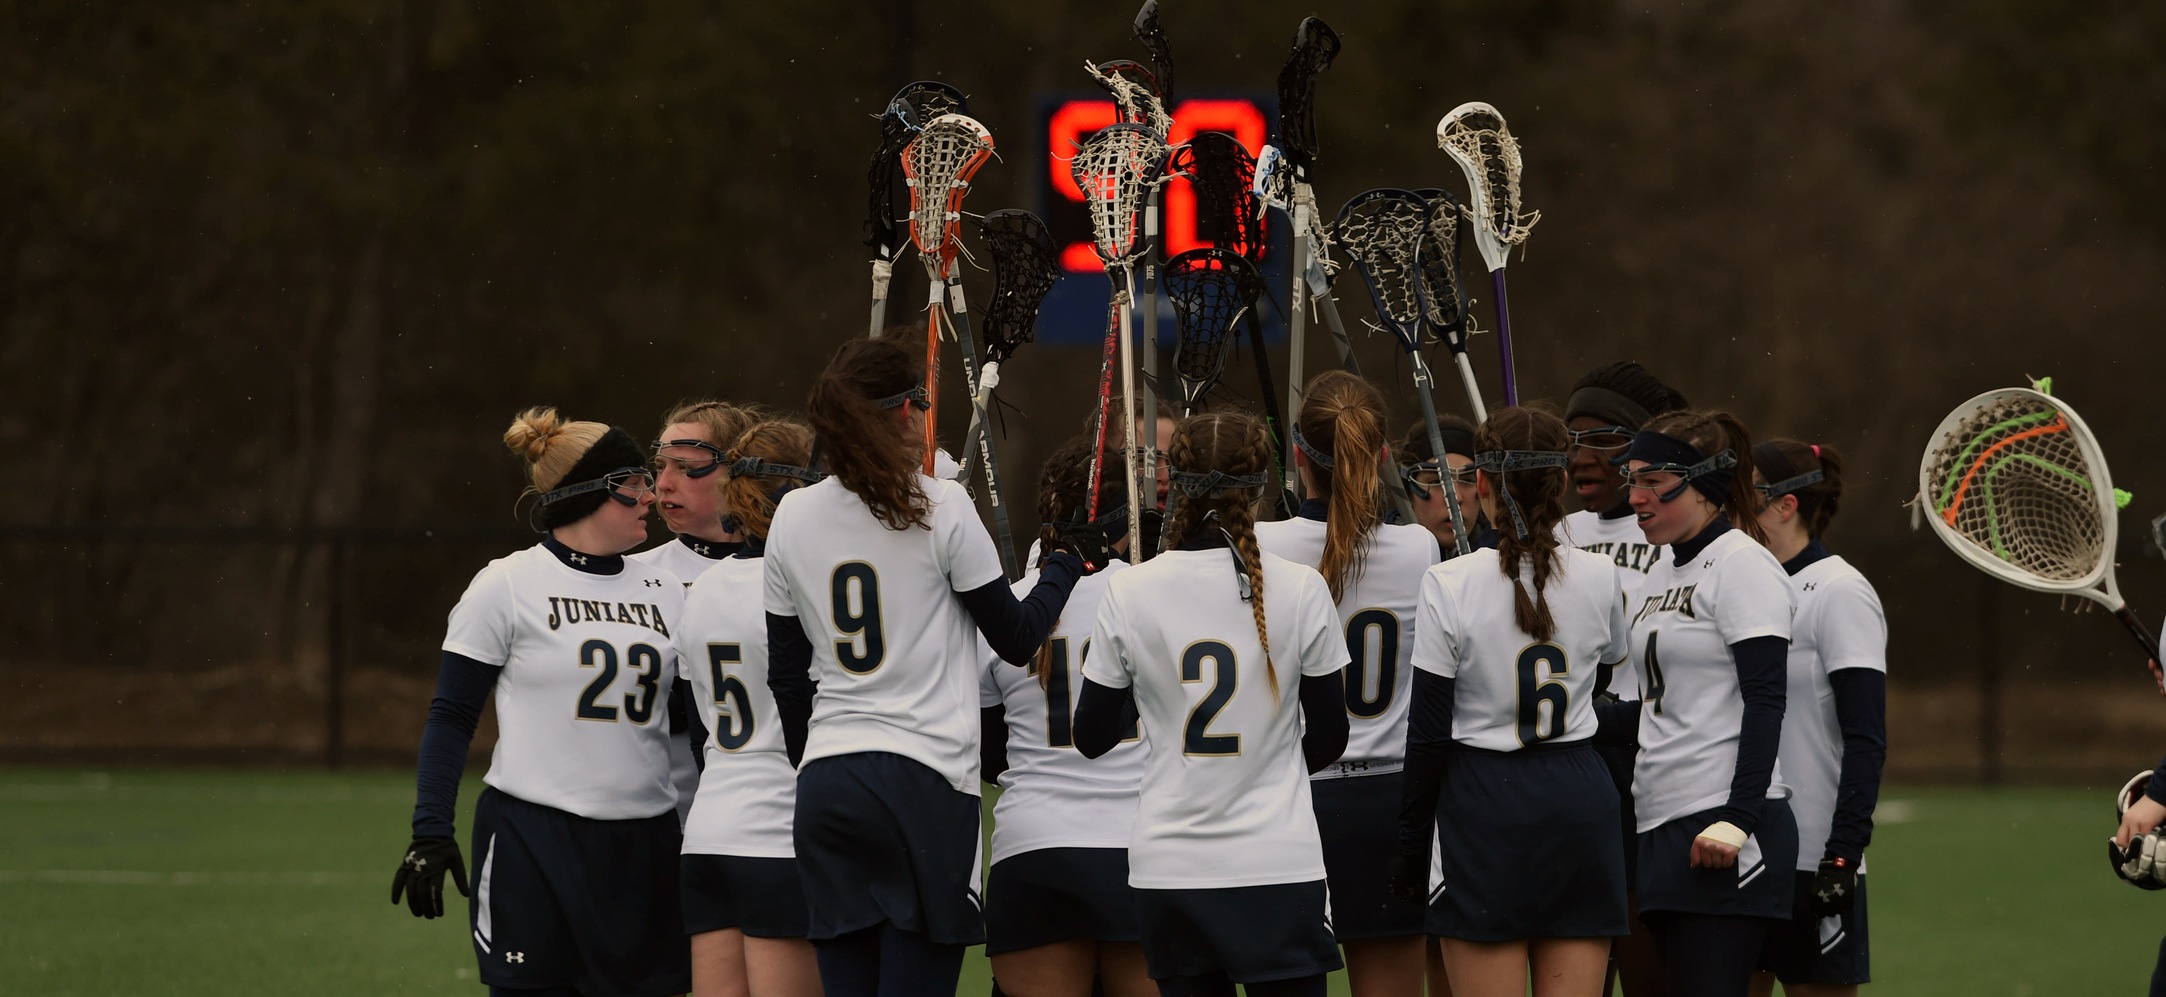 Women's Lacrosse to Host Junior Day on February 18th